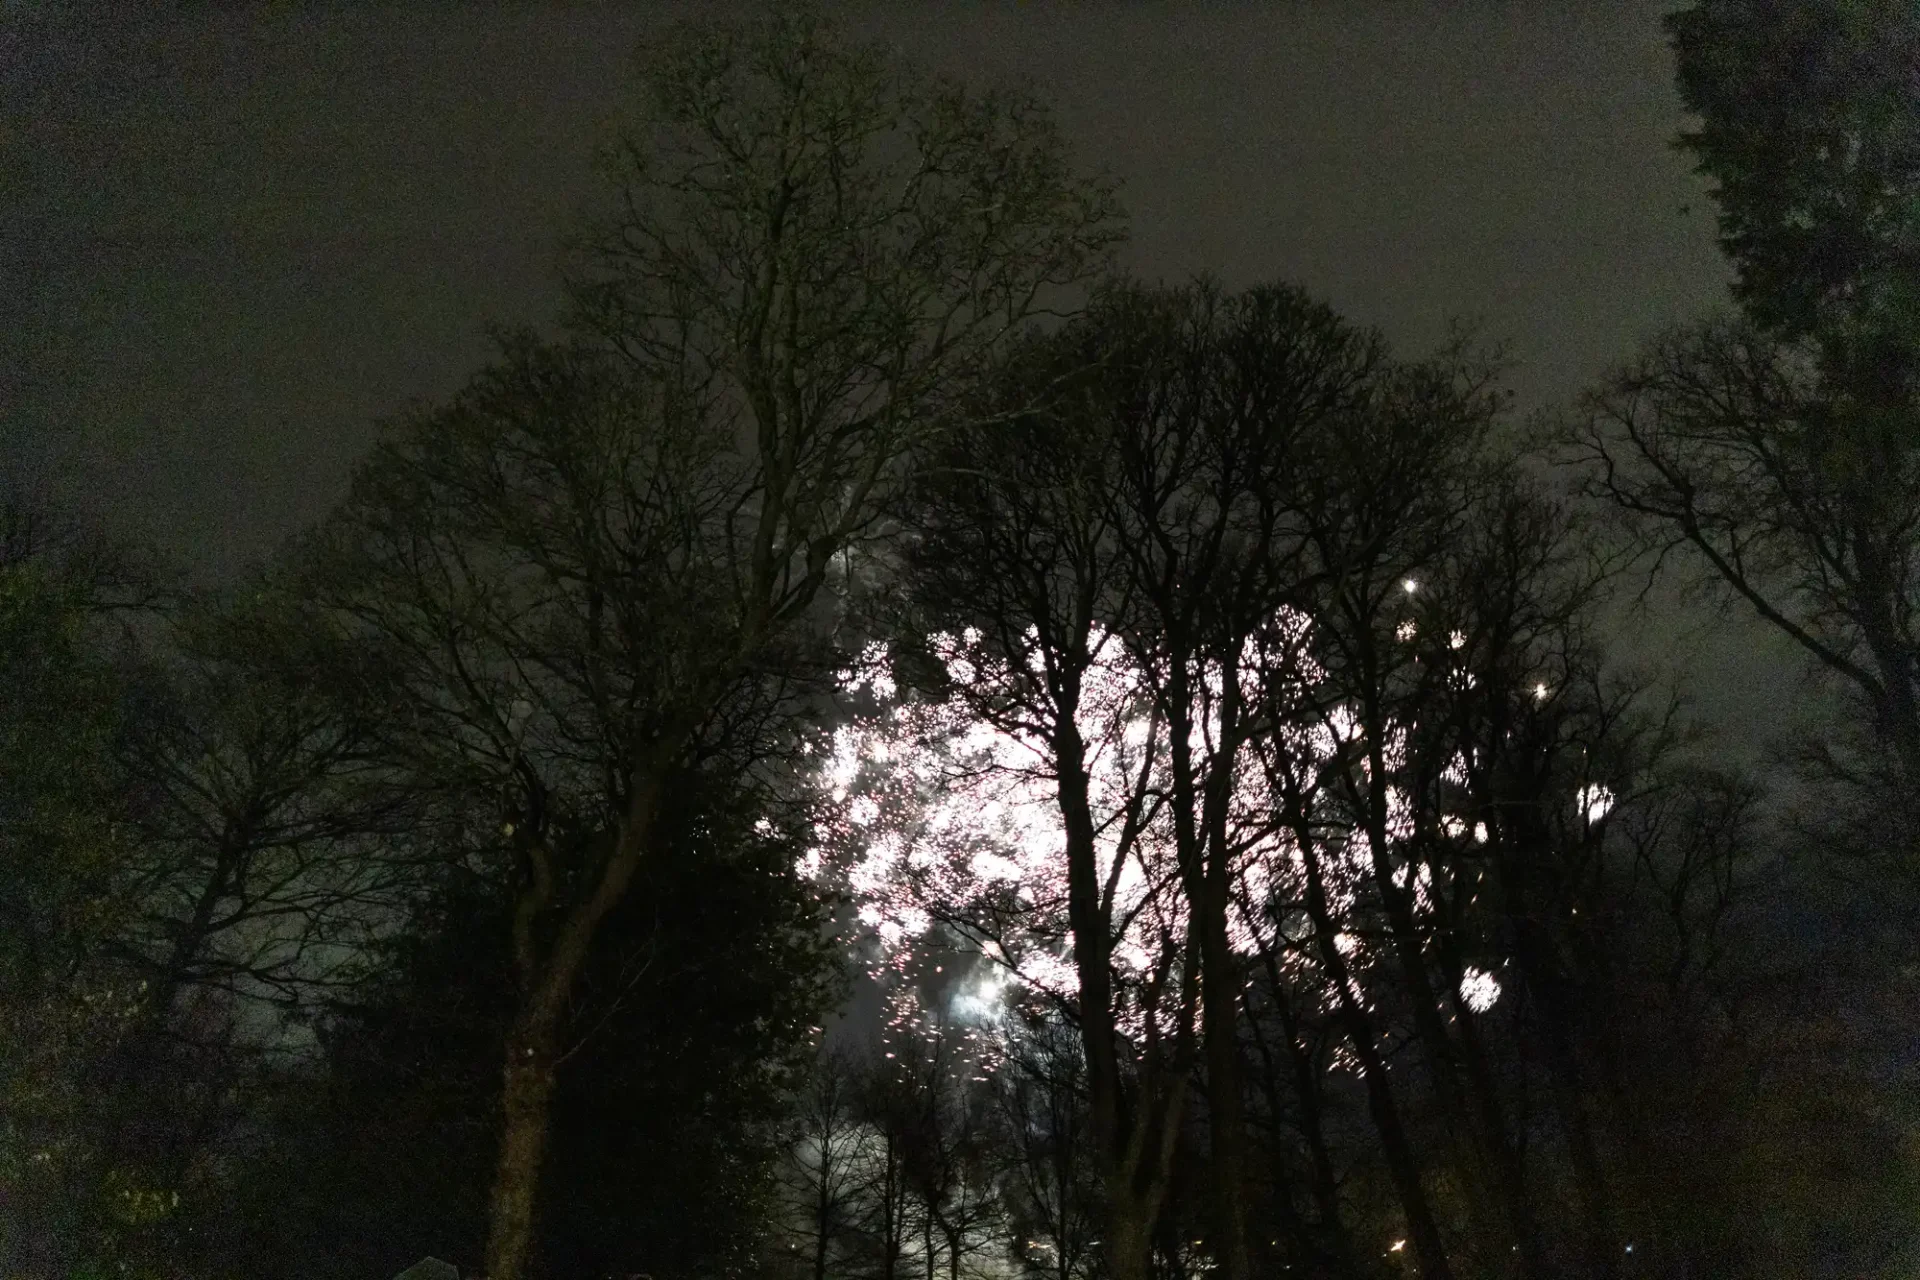 Fireworks light up the night sky behind silhouetted leafless trees.